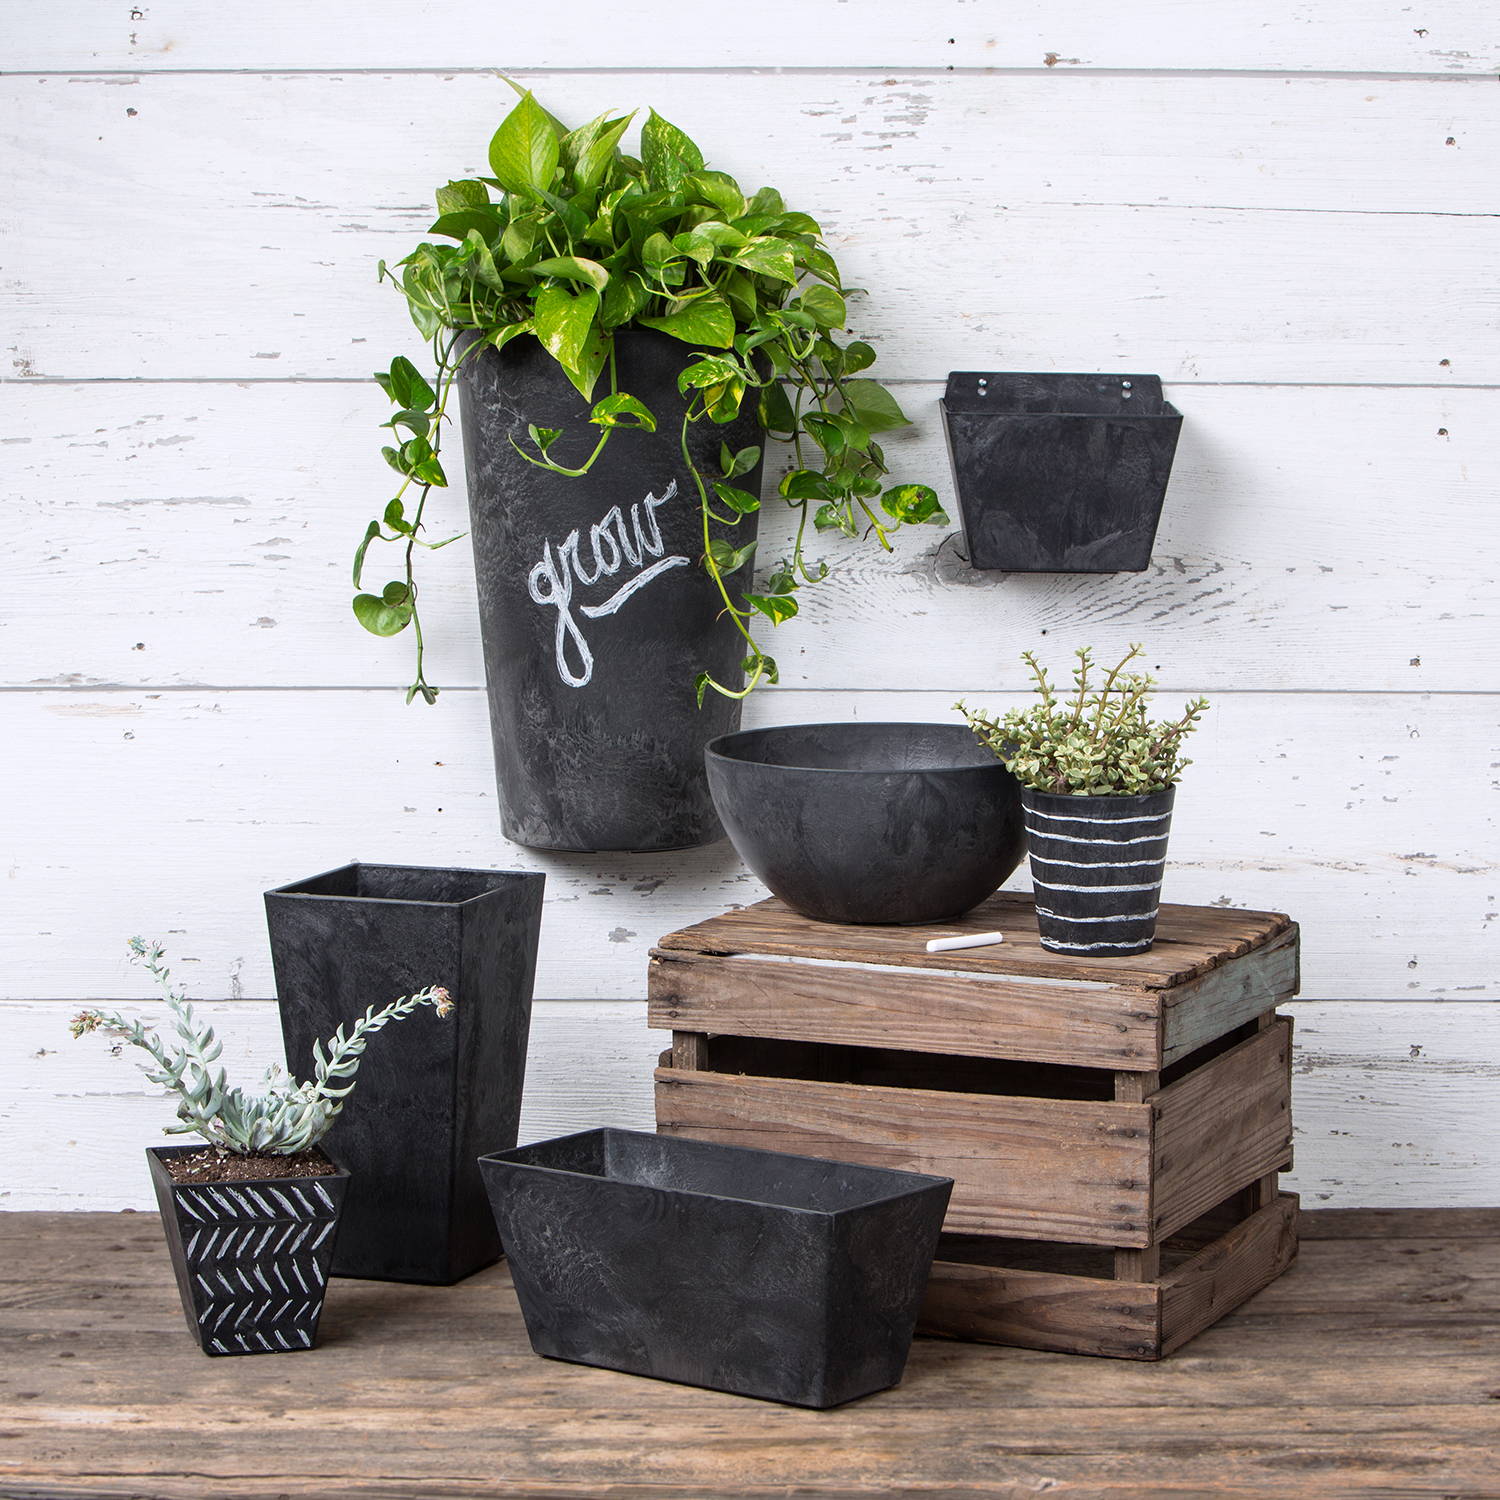 Several black planters of different shapes are sitting and hanging on a wall